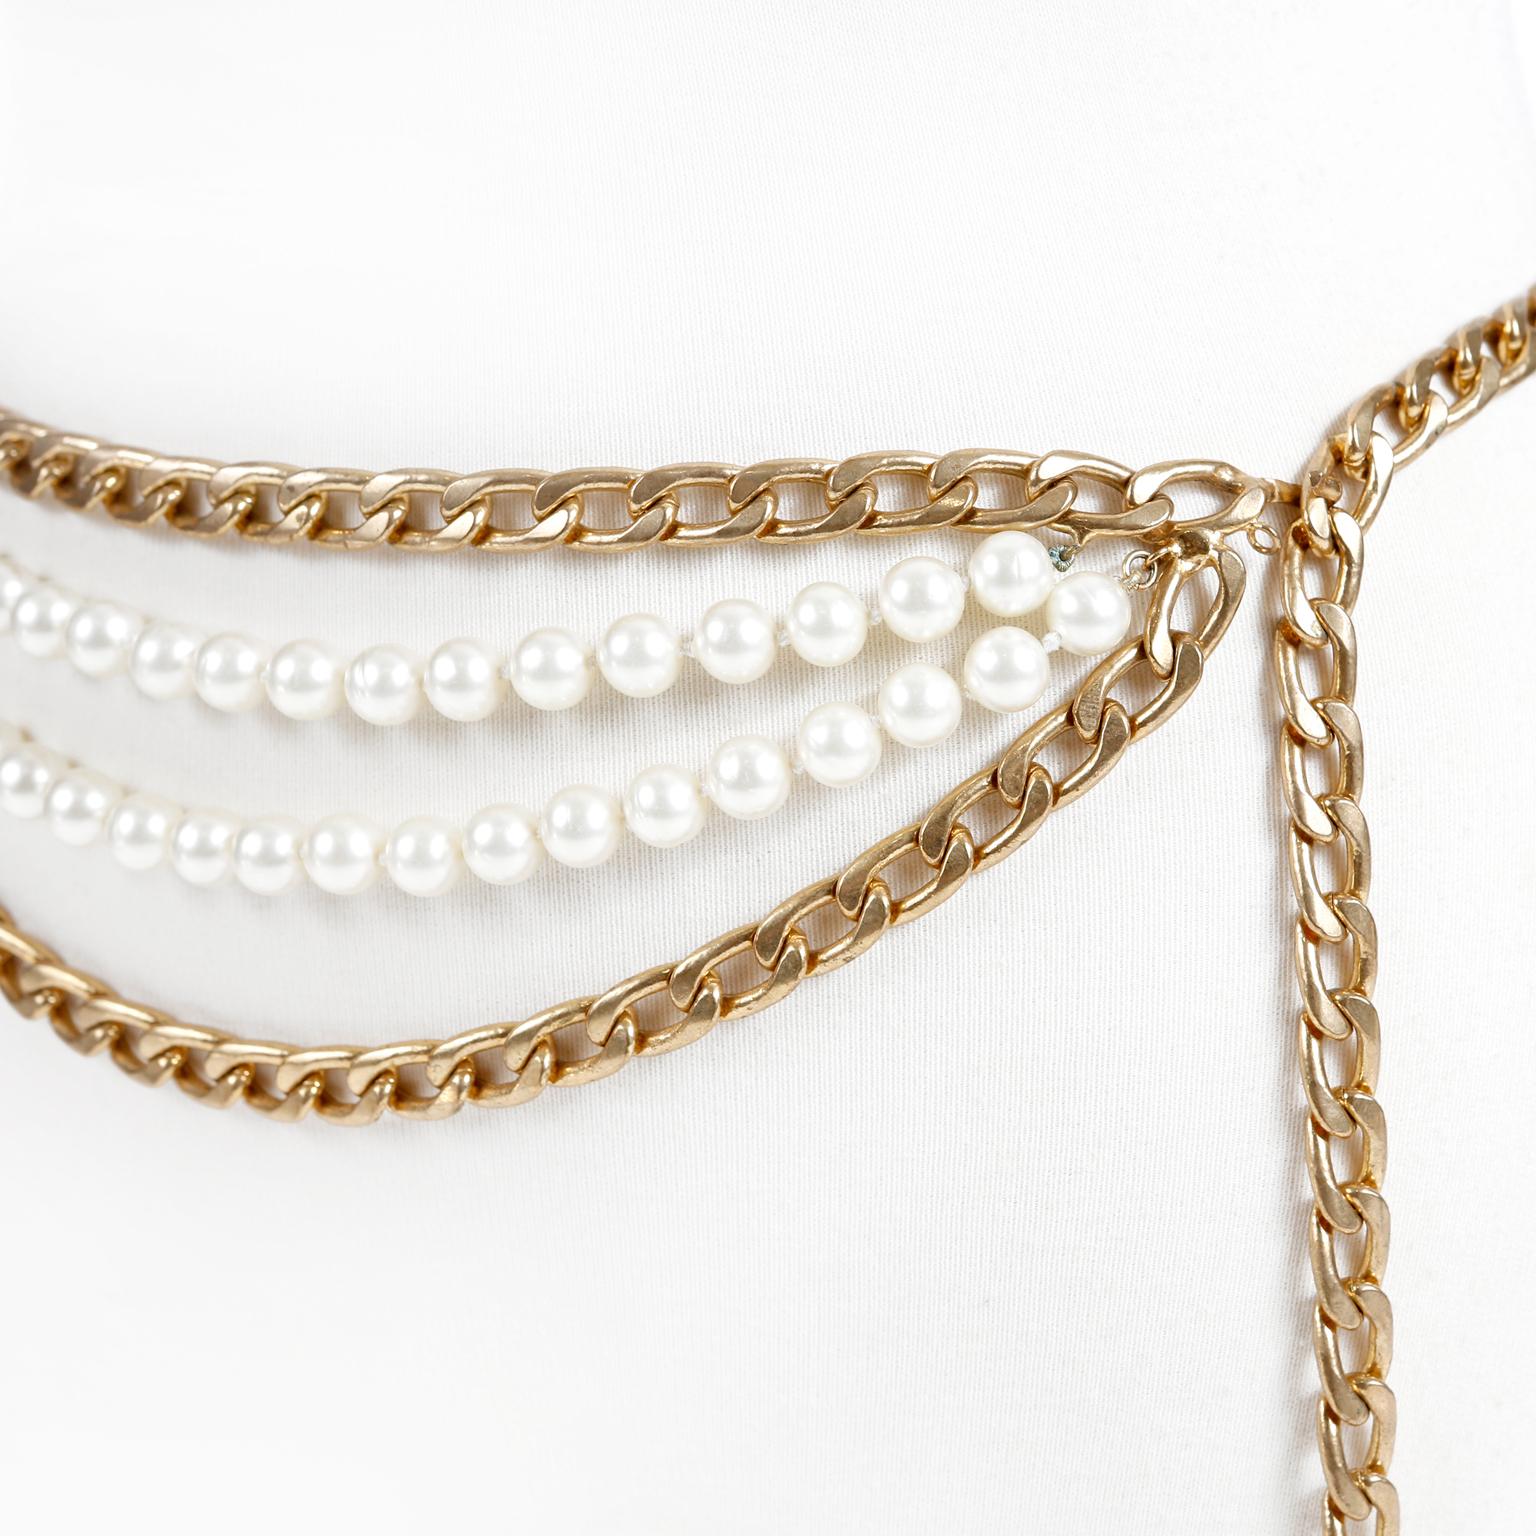 This authentic Chanel Gold Double Chain and Pearl Tassel Belt is in excellent condition.  Very unique style combines double gold tone curb chain with a double row of faux pearls. Large gold tone beaded tassel dangles from the end.   May be worn as a